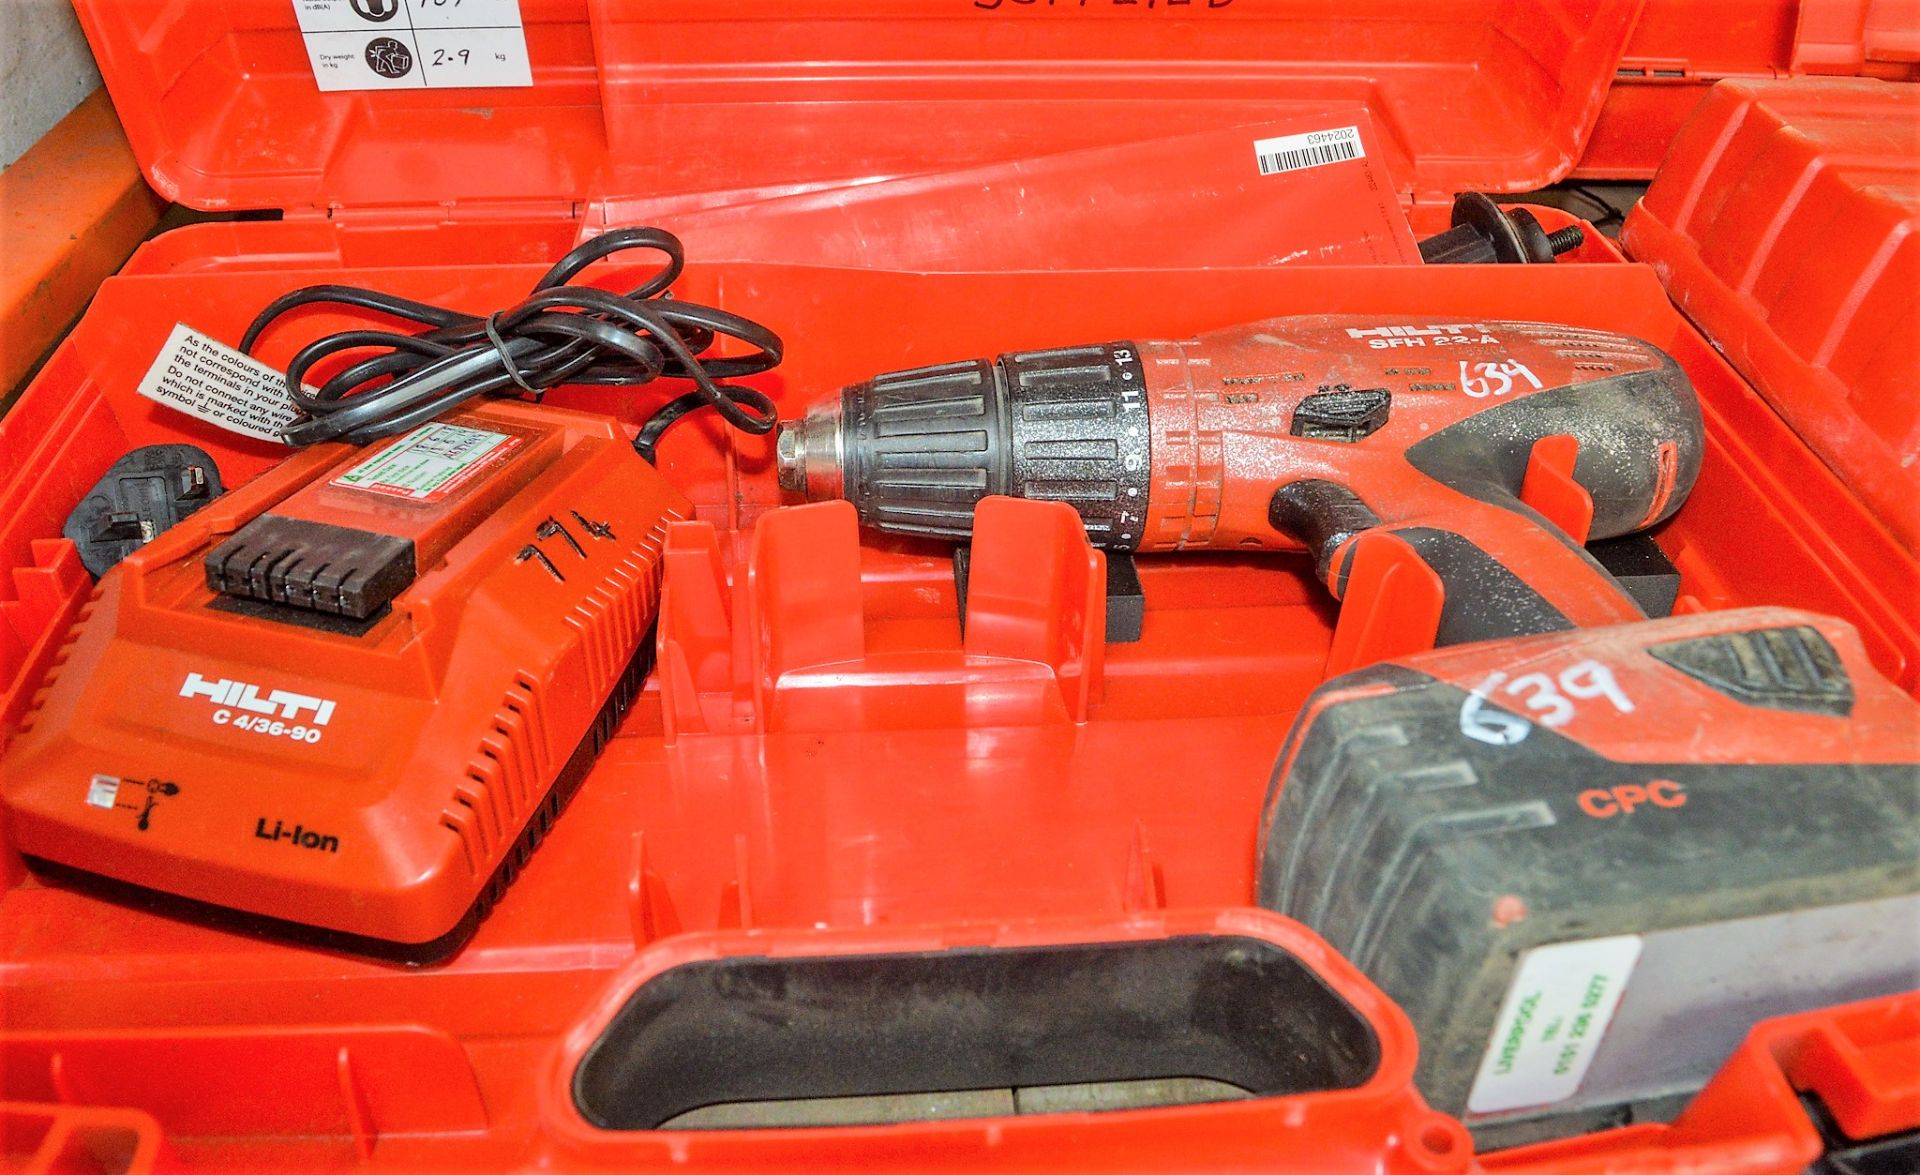 Hilti SFH22-A 22v cordless power drill c/w charger, battery & carry case A687699